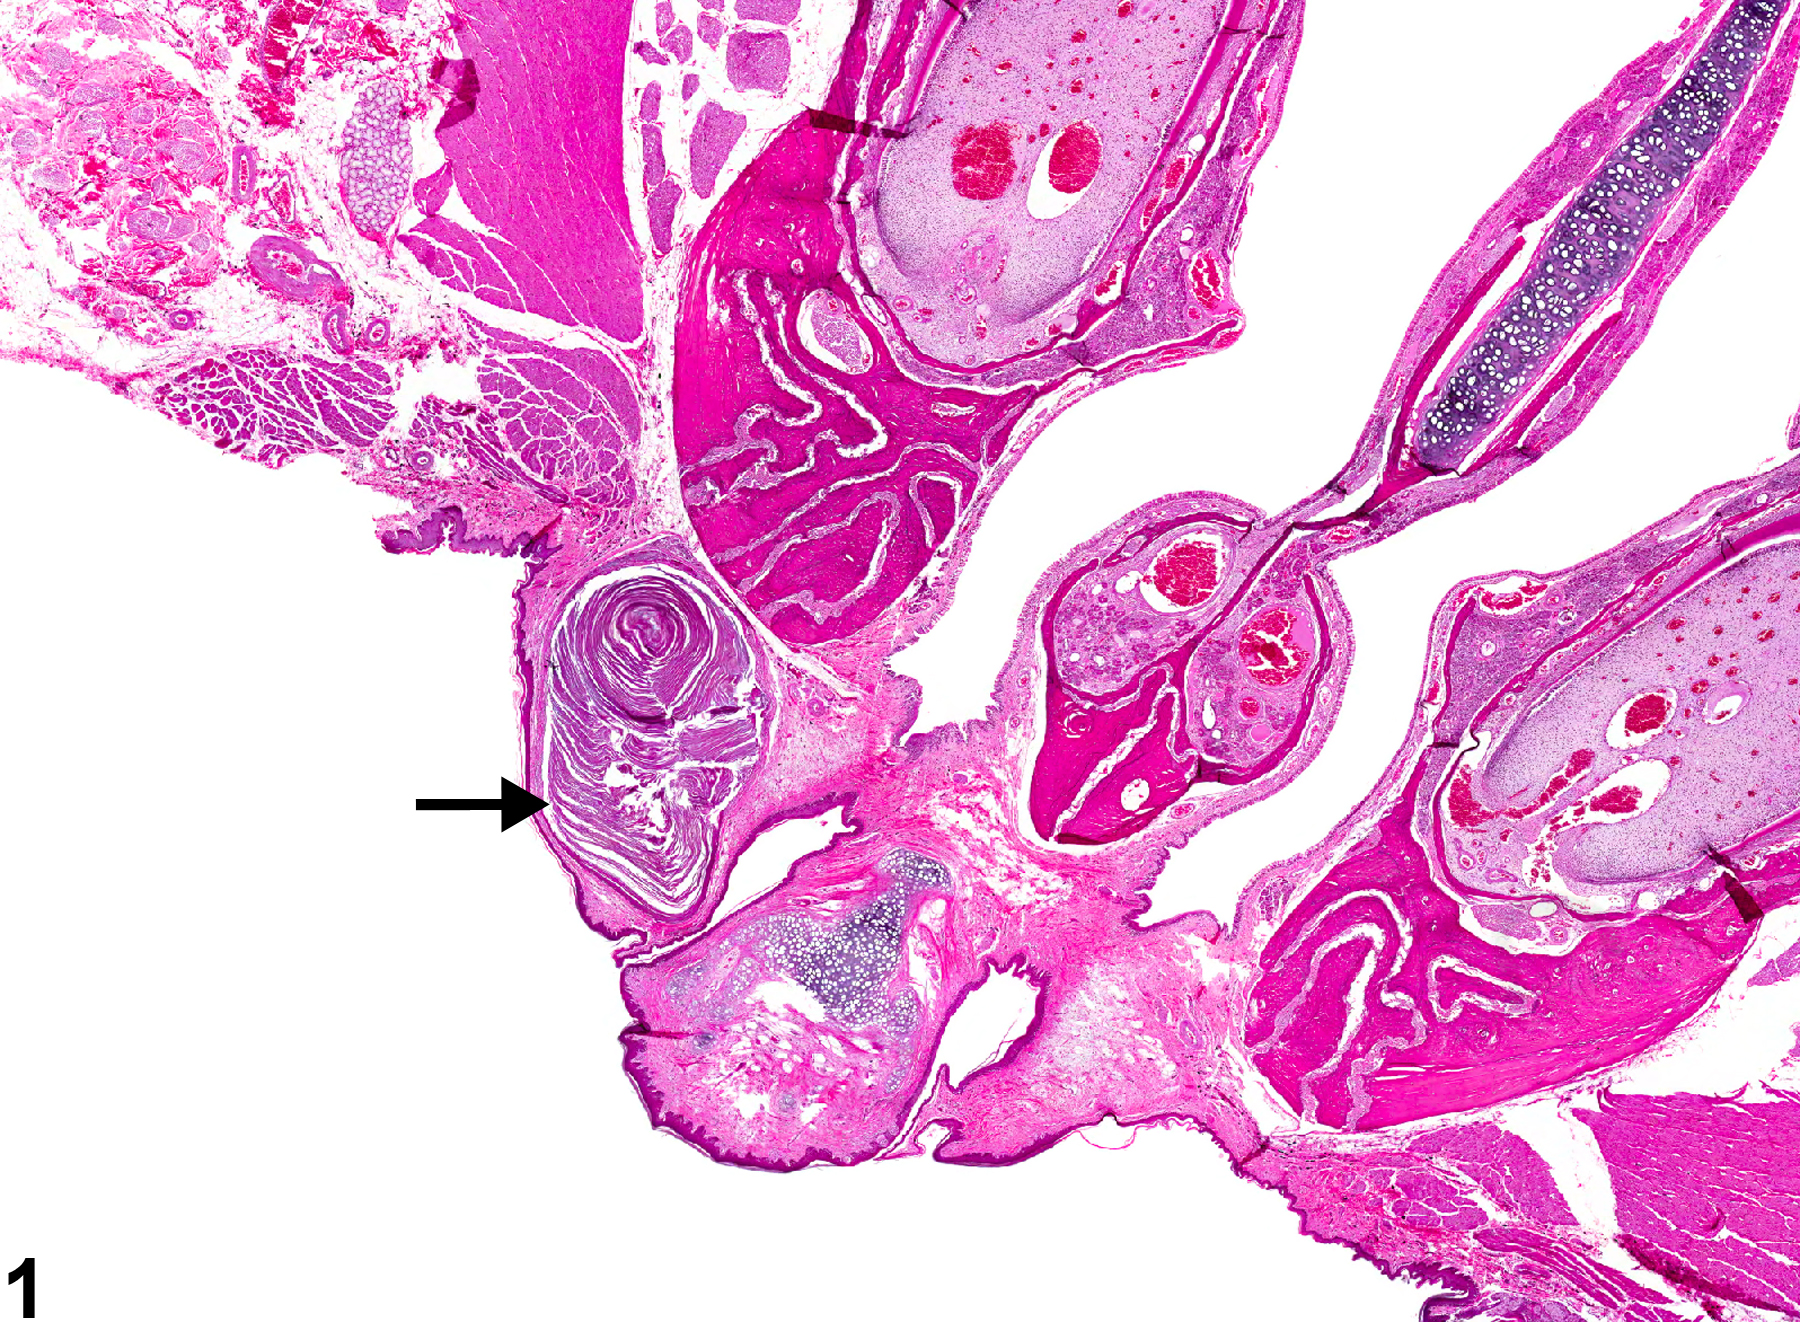 Image of cyst, squamous in the oral mucosa from a female F344/N rat in a chronic study